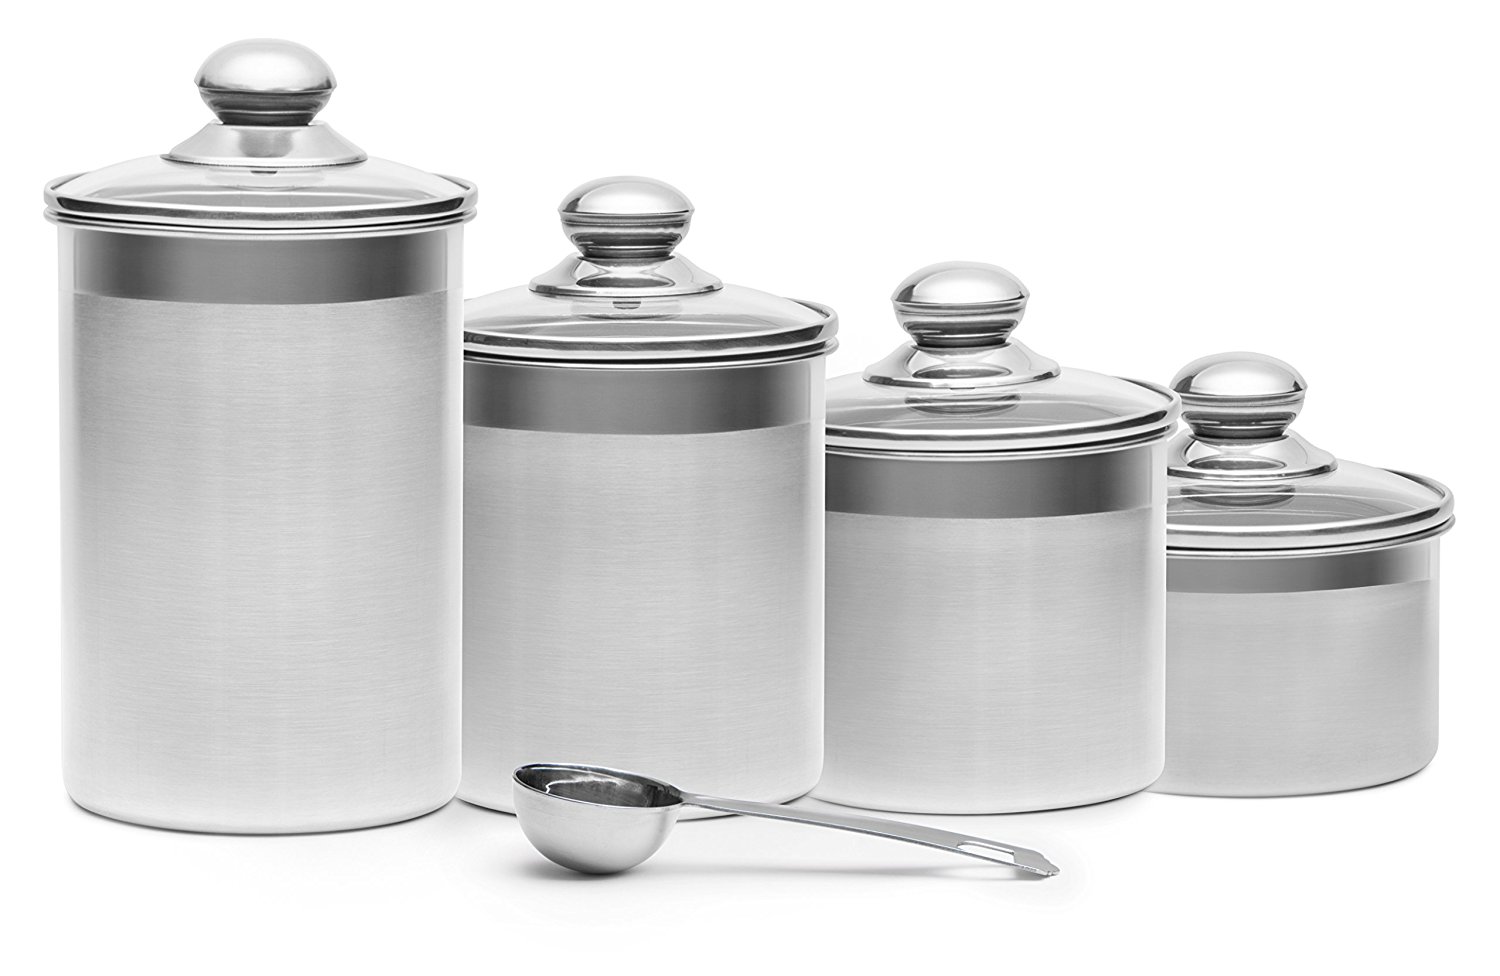 +Steel 4-Piece Stainless Steel Canister Set with Scoop and Lids